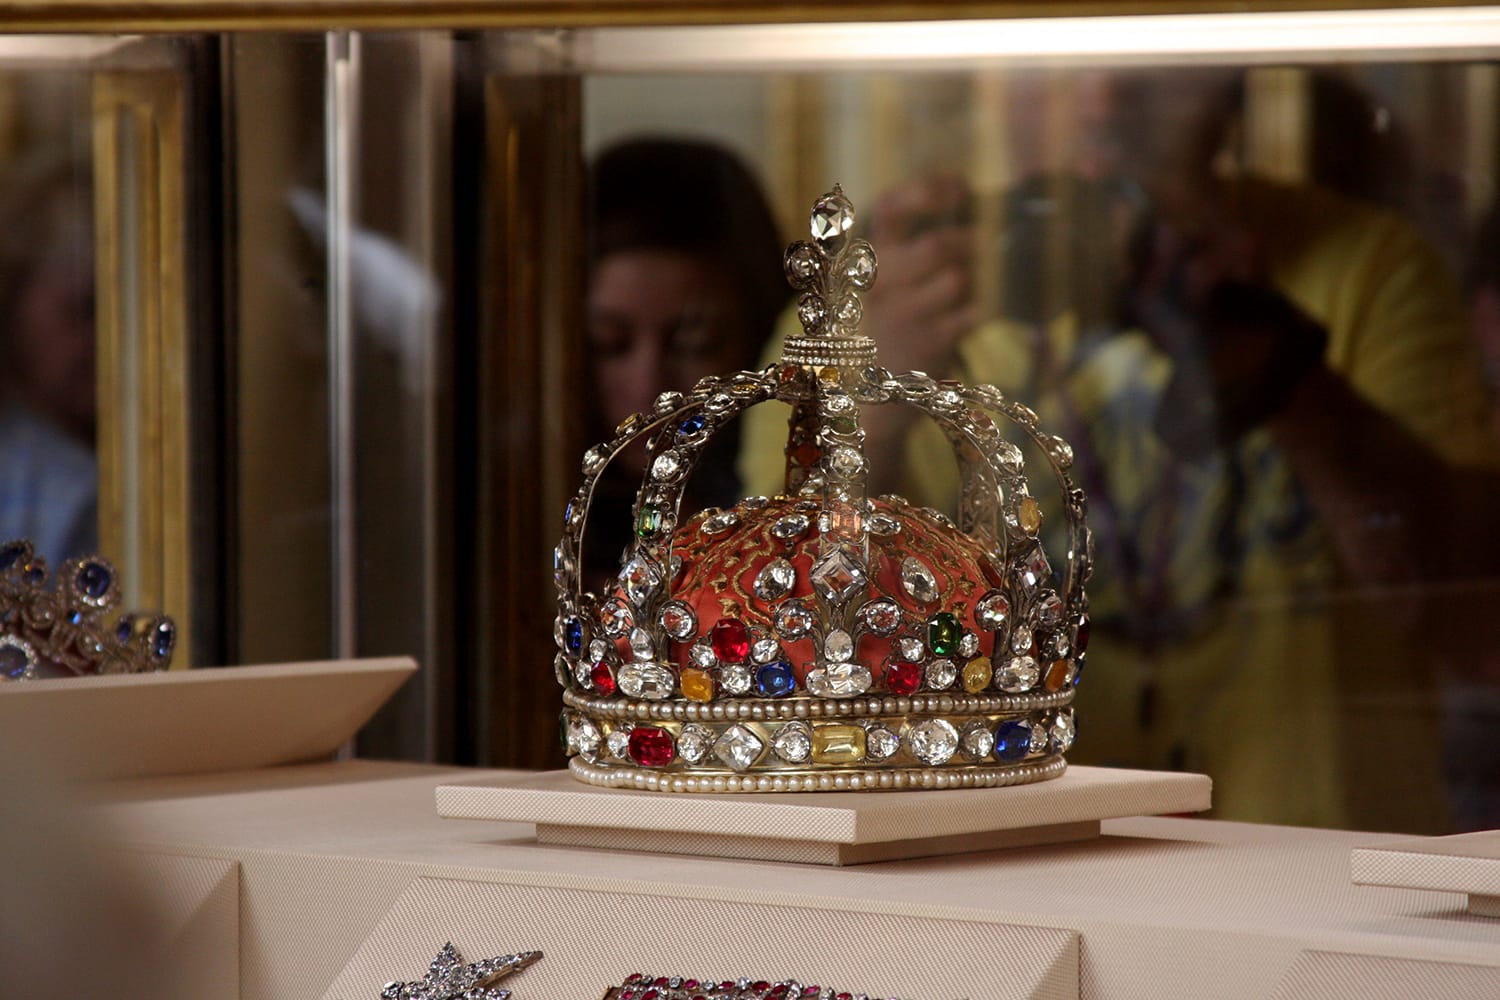 The British Crown Jewels on display at the Tower of London.